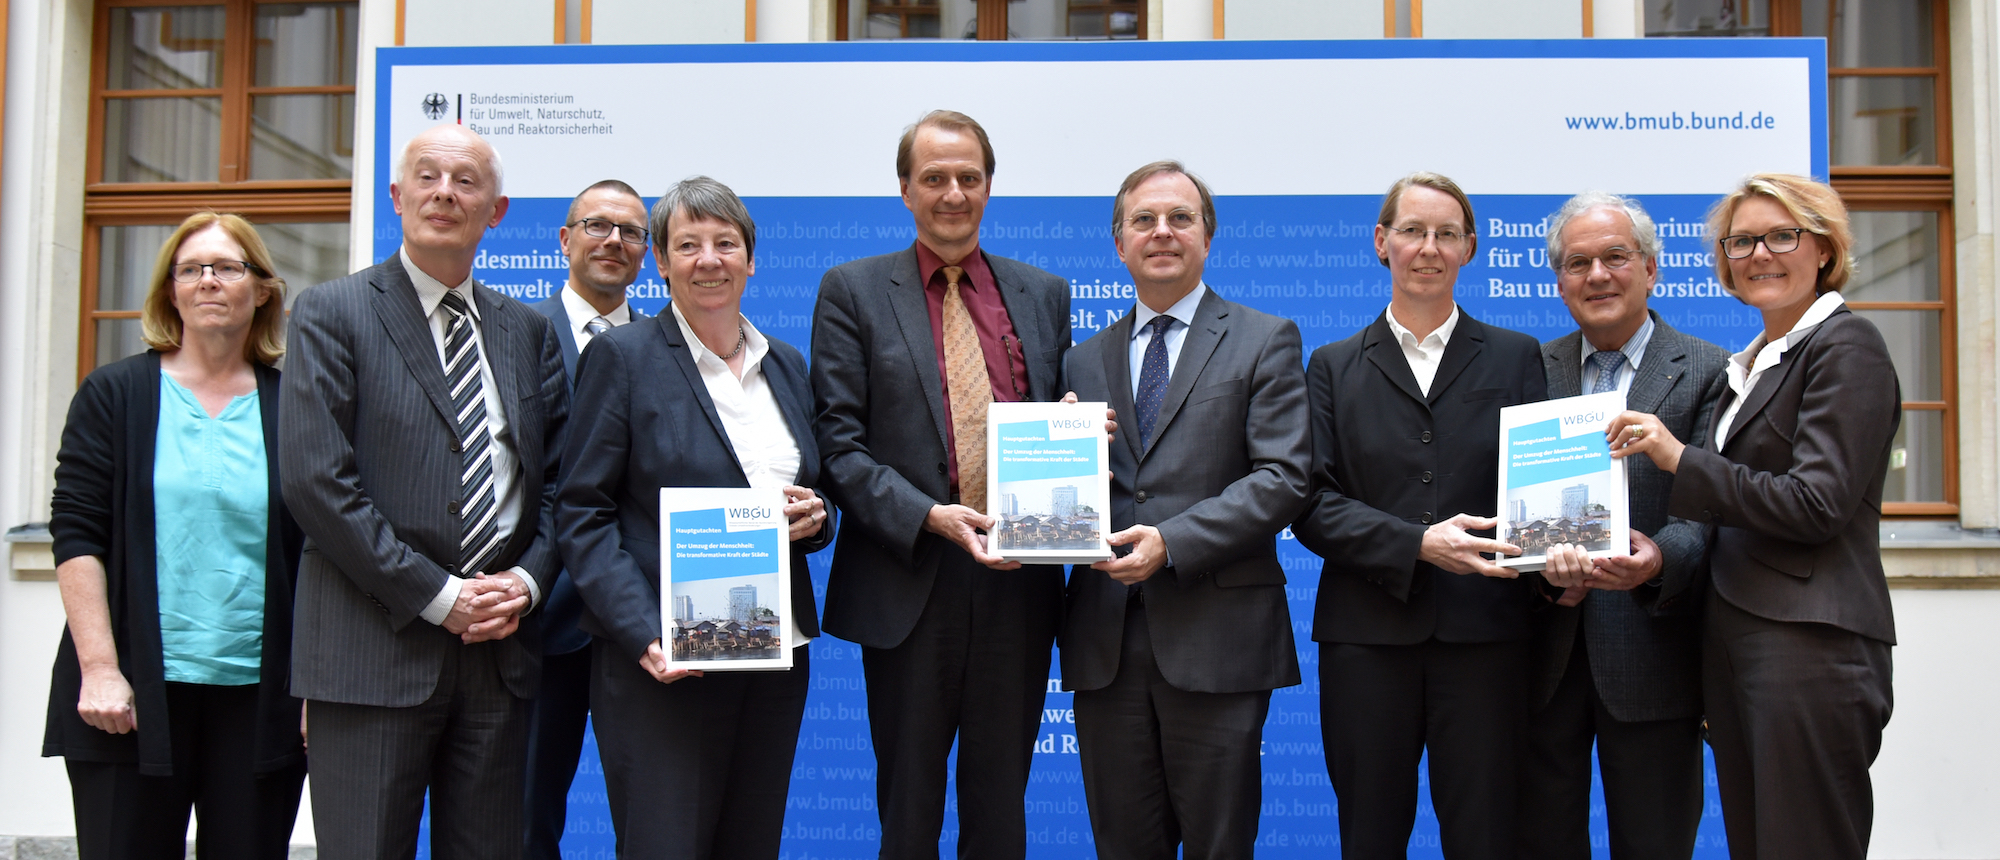 Submission of the report "Humanity on the move: Unlocking the transformative power of cities" to the German Federal Government. 